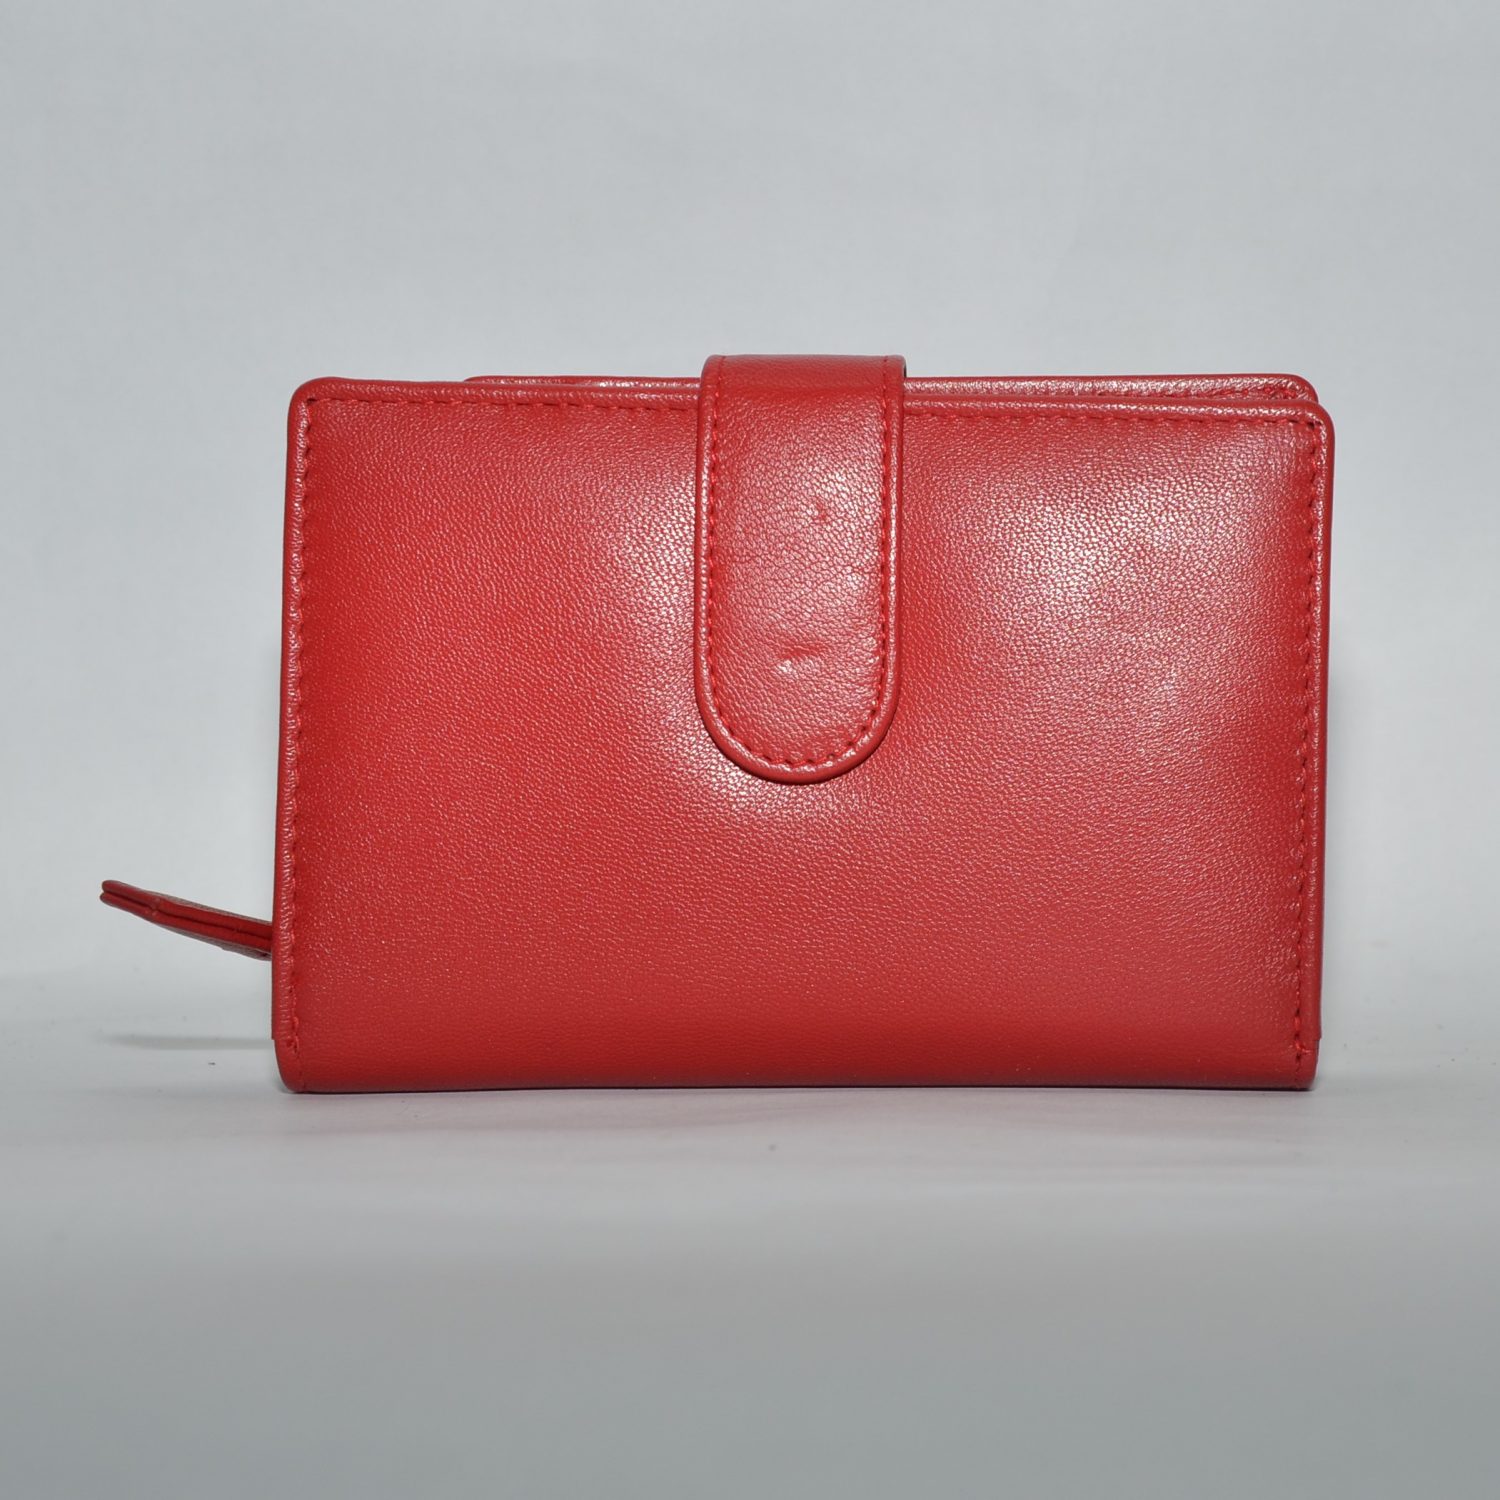 Primehide Leather RFID Purse - Style No. 2812 - OJP Products